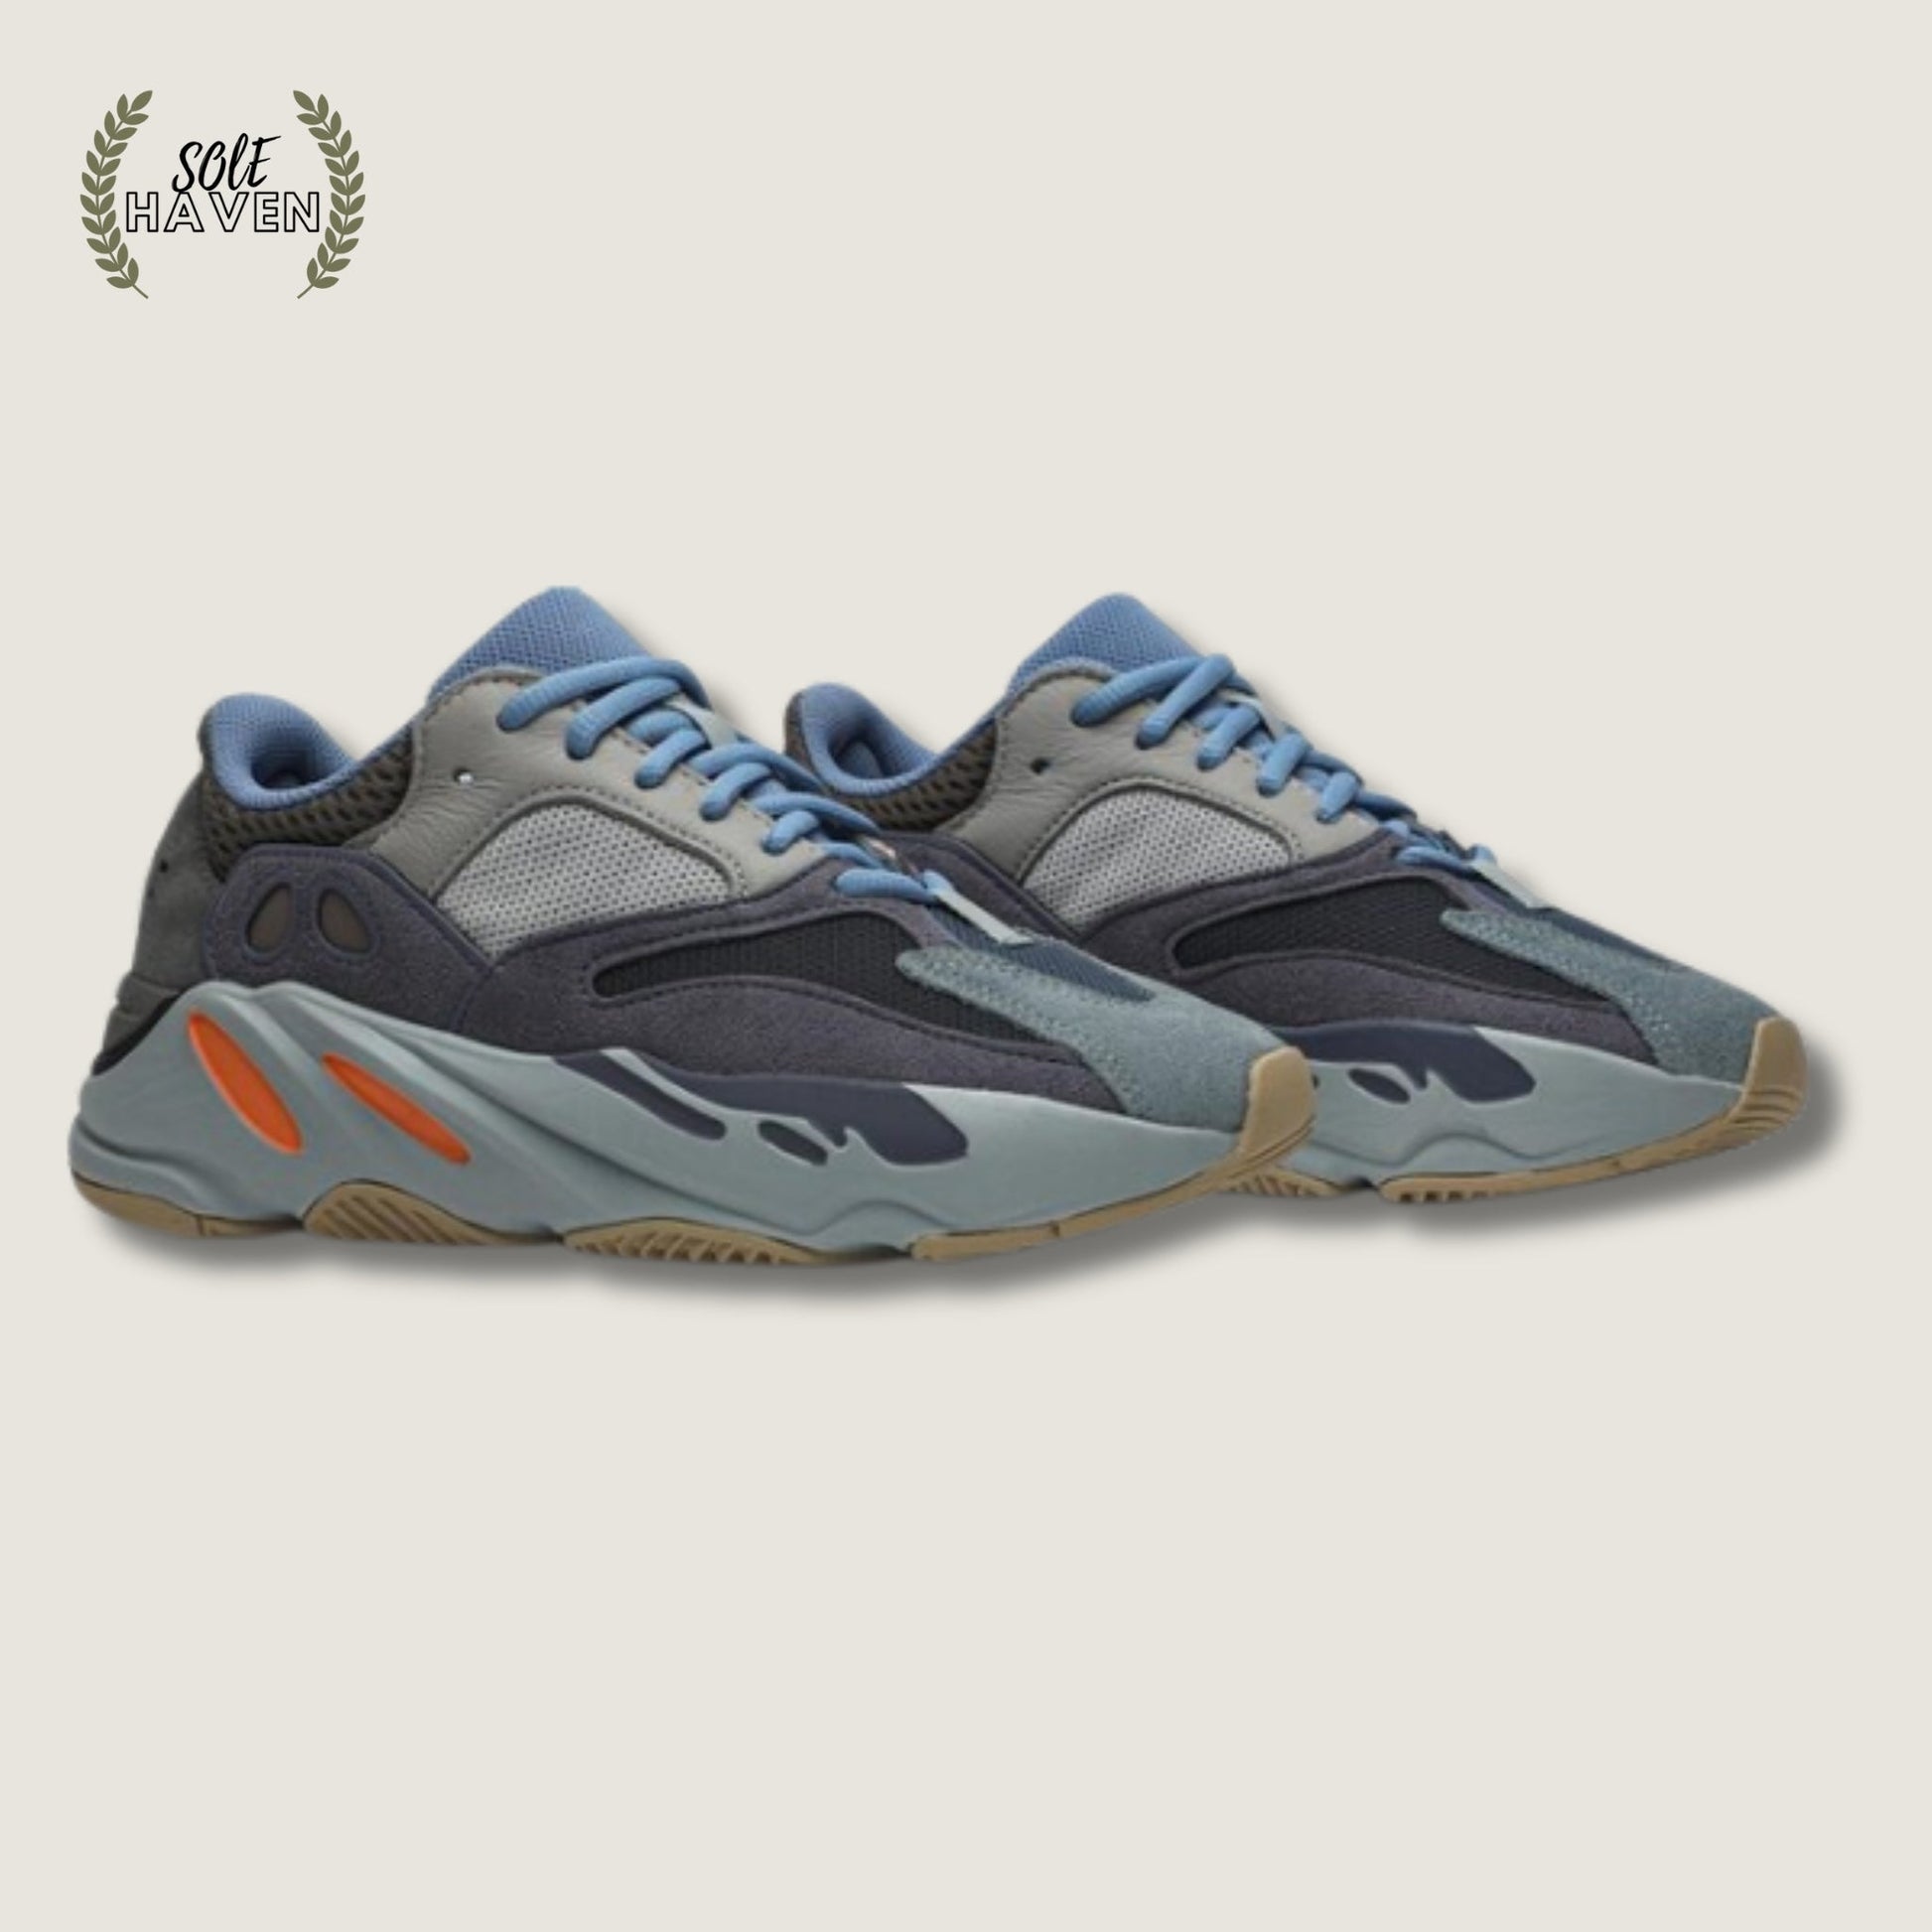 Yeezy Boost 700 'Carbon Blue' - Sole HavenShoesAdidas